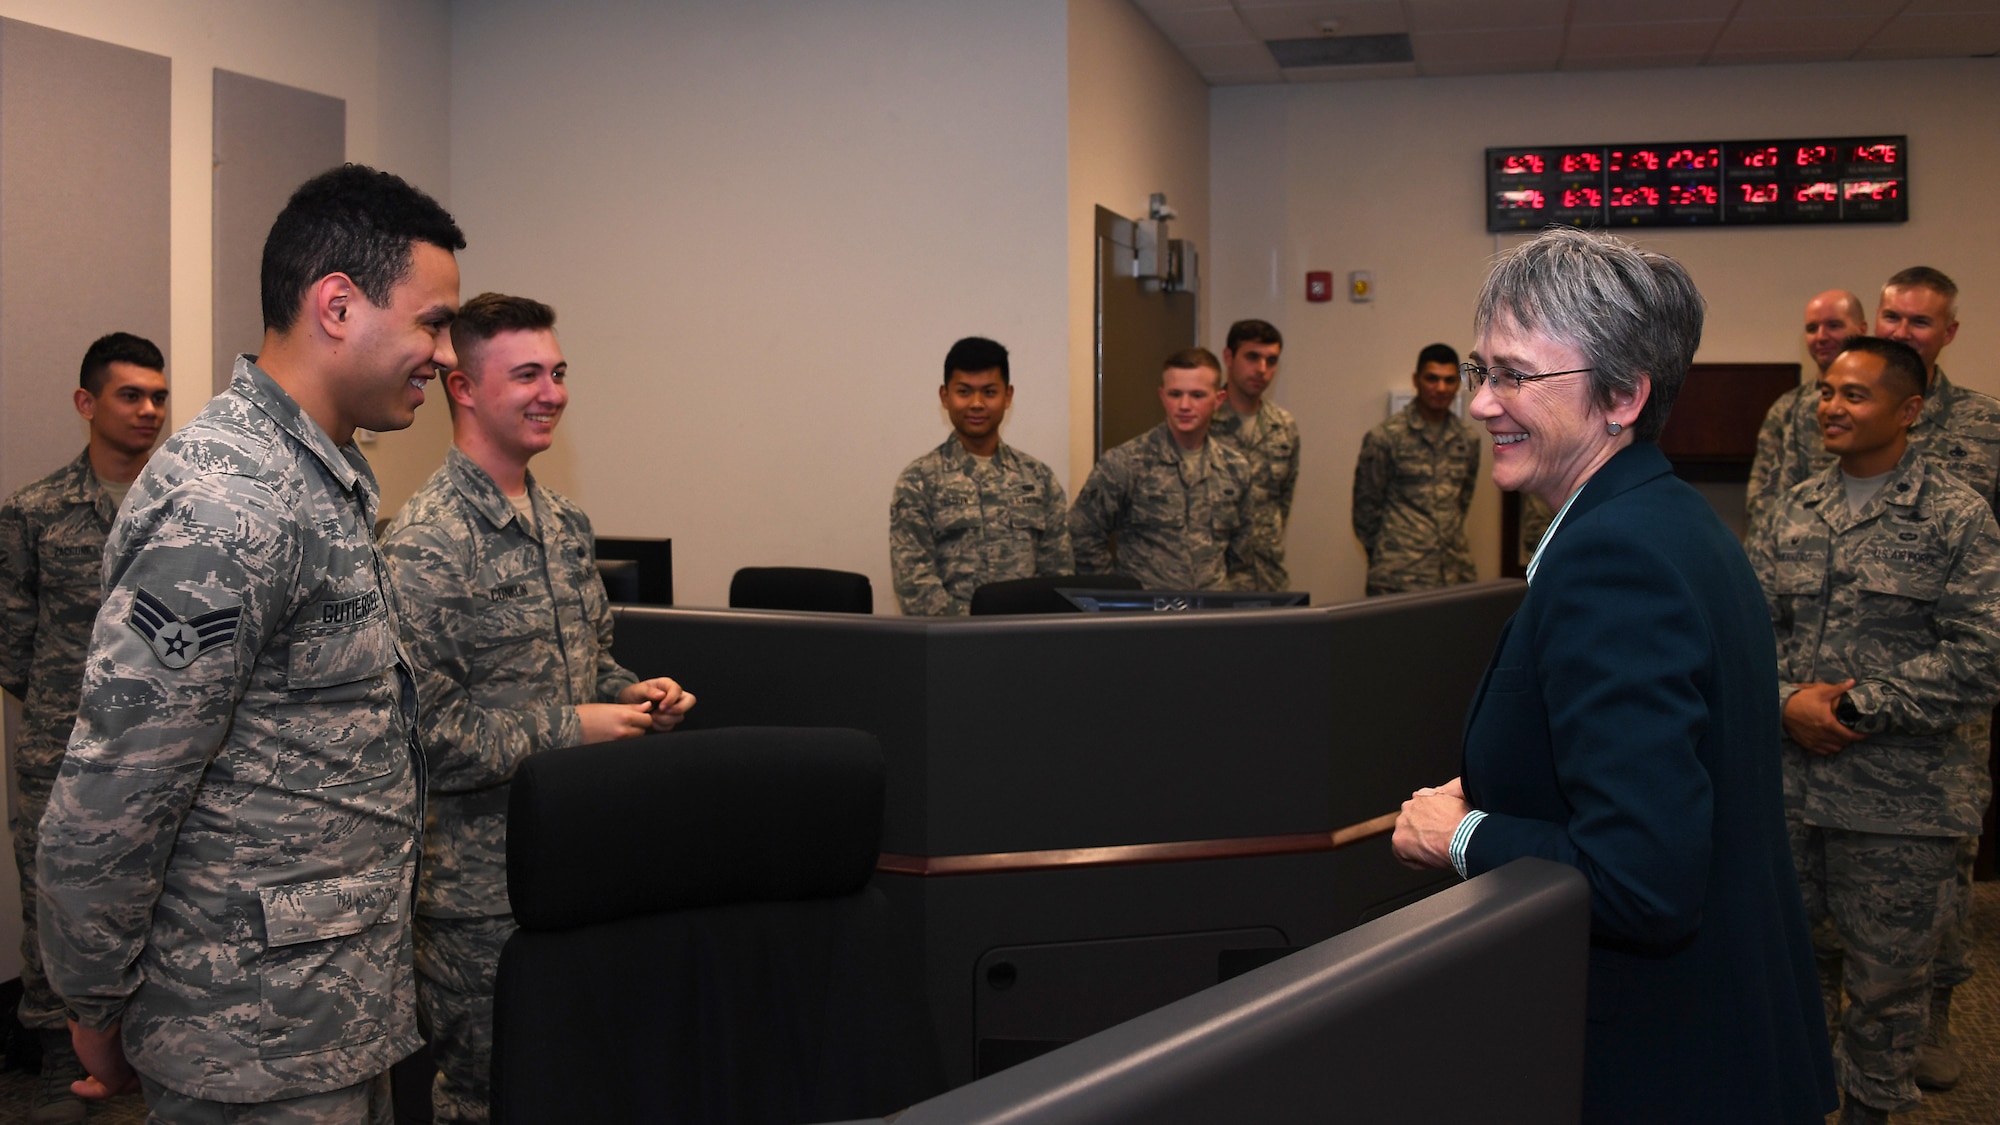 Secretary of the Air Force Heather Wilson speaks with Senior Airman Wilfredo Gutierrez, High Frequency Global Communications Squadron technician with the 319th Communications Squadron, August 20, 2018 on Grand Forks Air Force Base, North Dakota. Wilson visited the 319 CS during a tour of Grand Forks AFB in order to learn more about the mission and its relevance to Air Force operations. (U.S. Air Force photo by Airman 1st Class Elora J. Martinez)